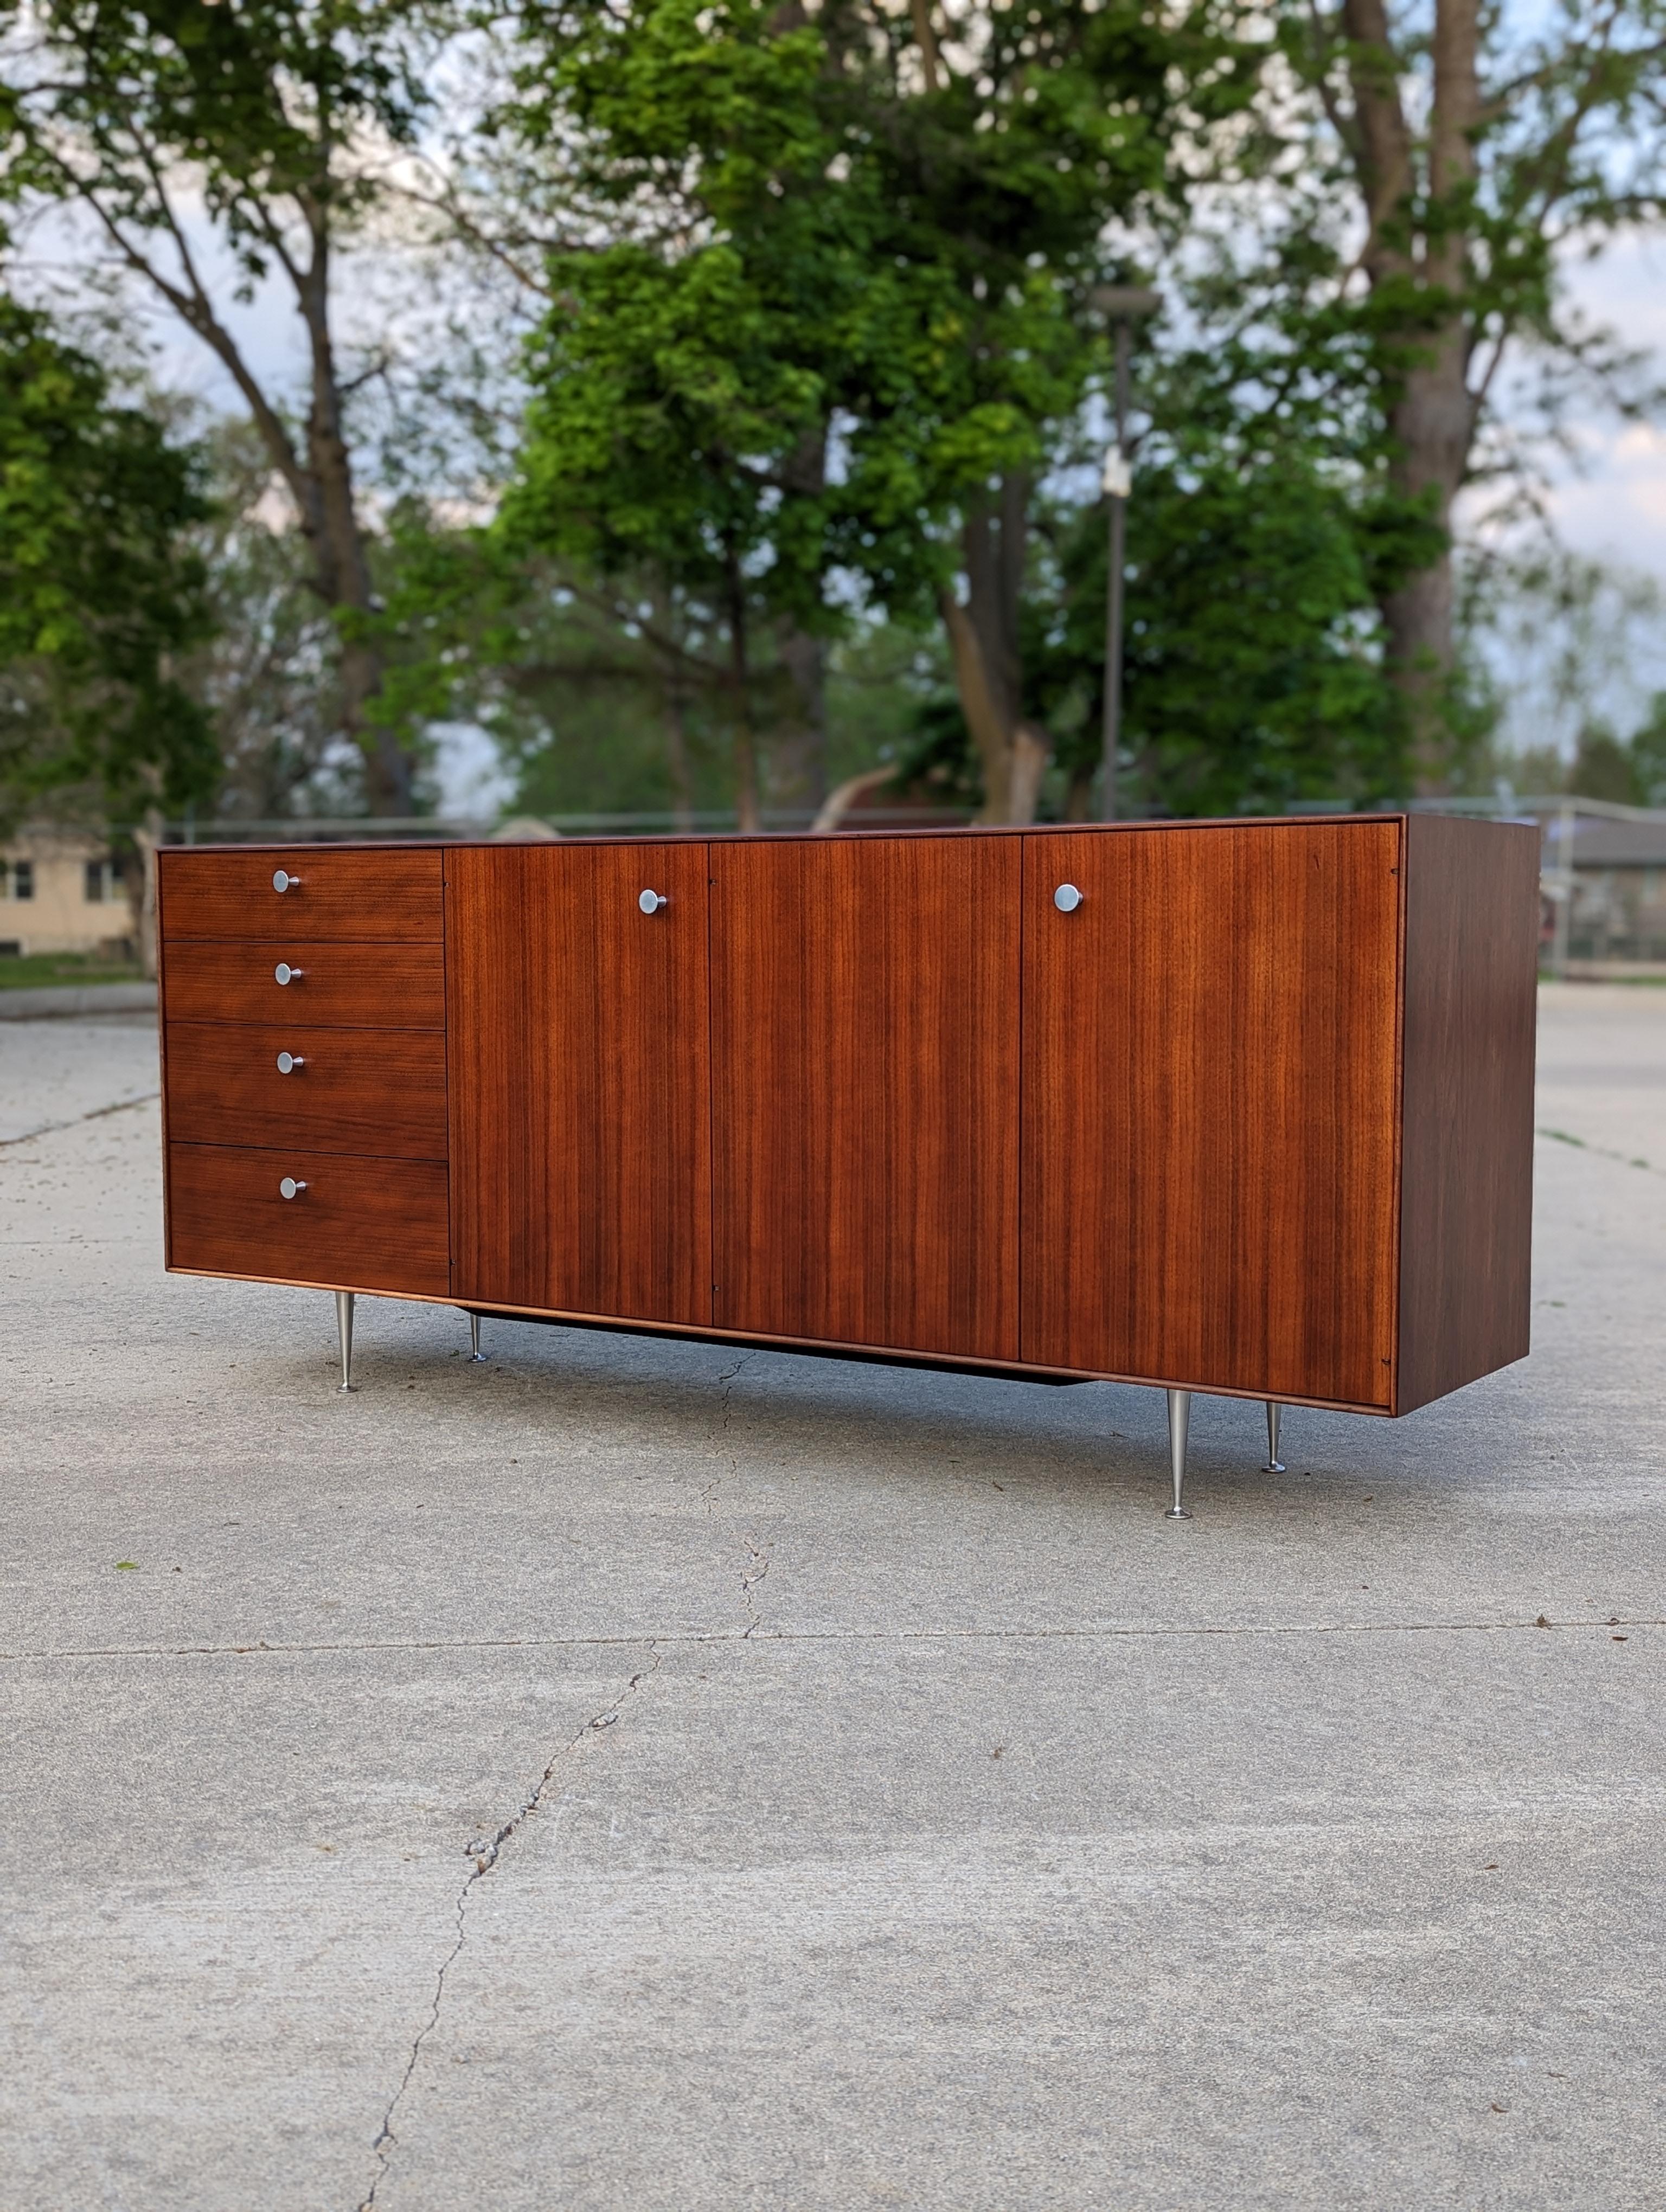 Beautiful George Nelson for Herman Miller thin edge sideboard / credenza. Walnut case in excellent condition. Large proportions and plenty of room for storage with 4 drawers, one hidden drawer, 3 compartments, 2 adjustable height shelves.

Please